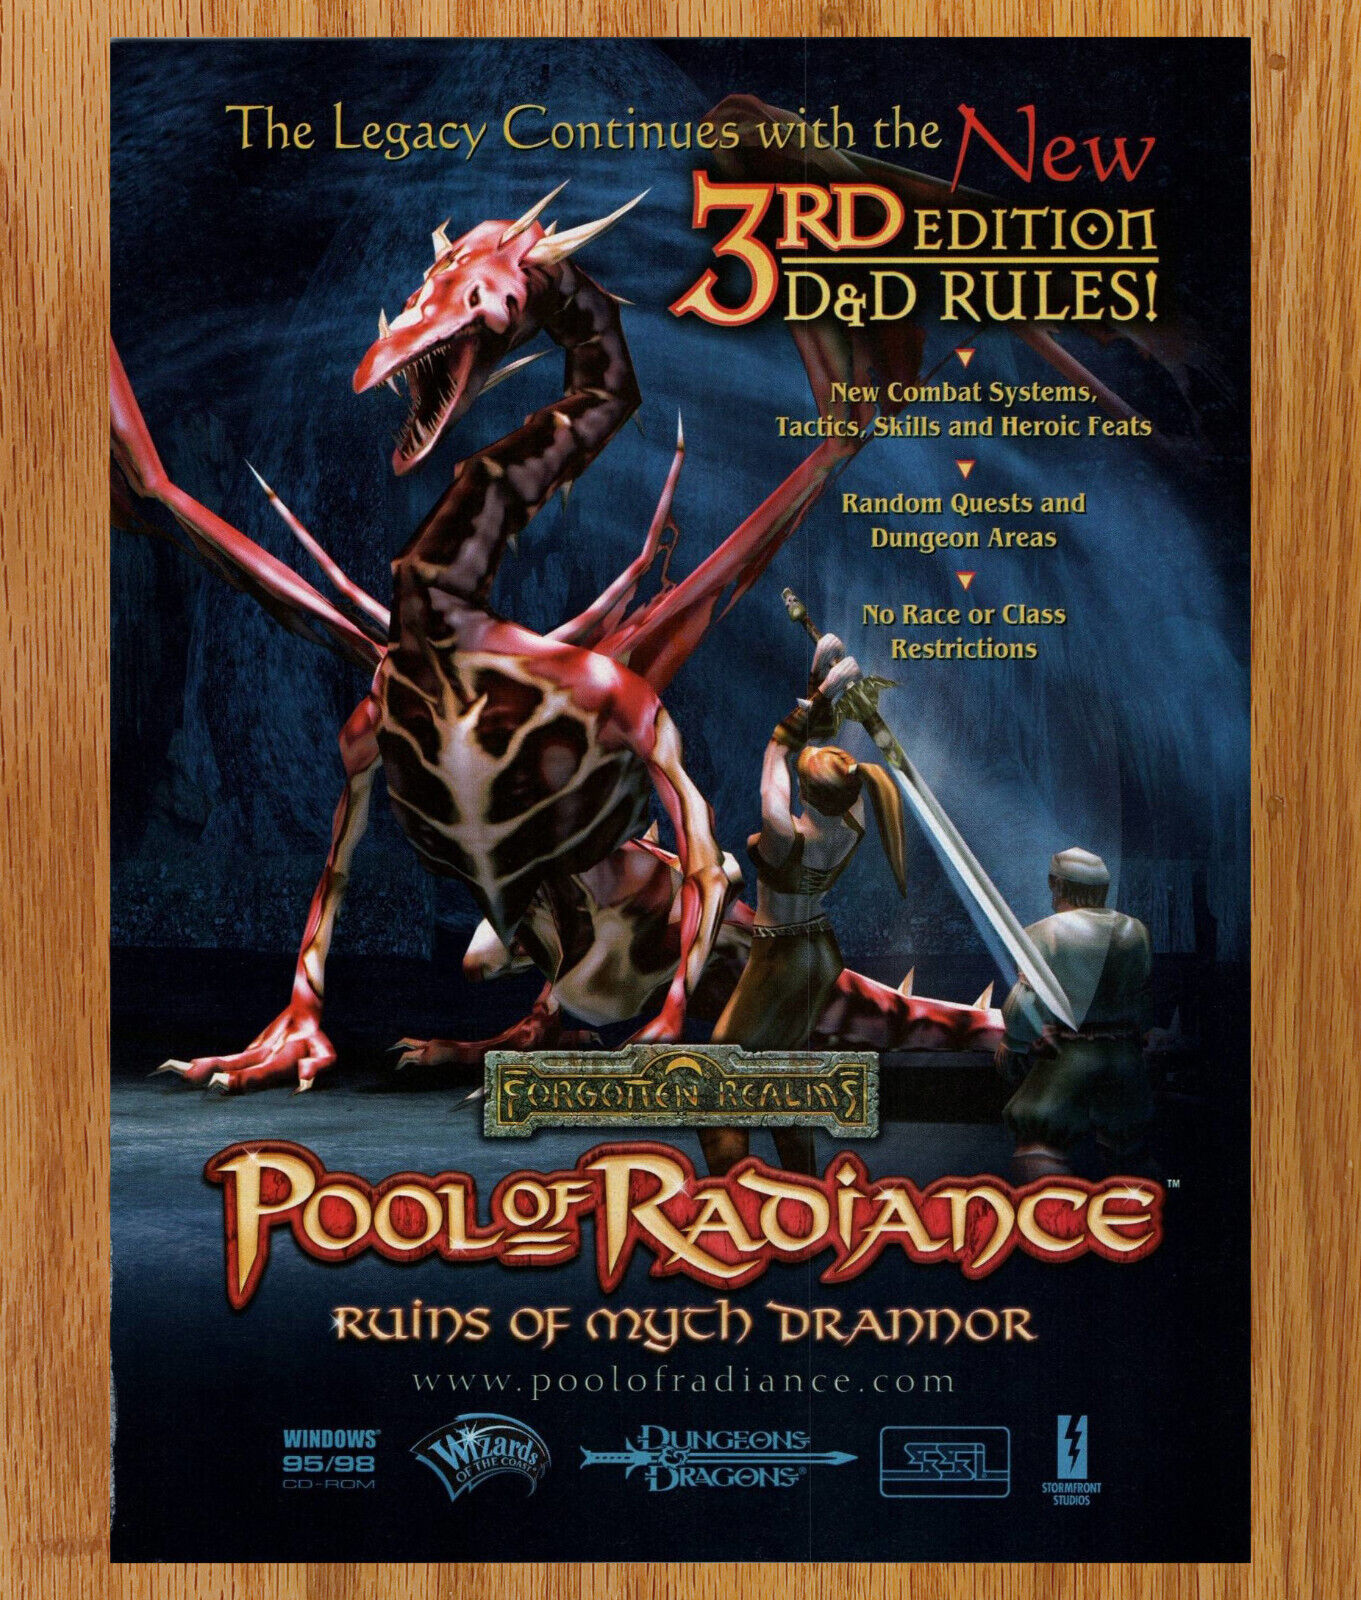 Forgotten Realms Pool of Radiance D&D - Game Print Ad / Poster Promo Art 2000